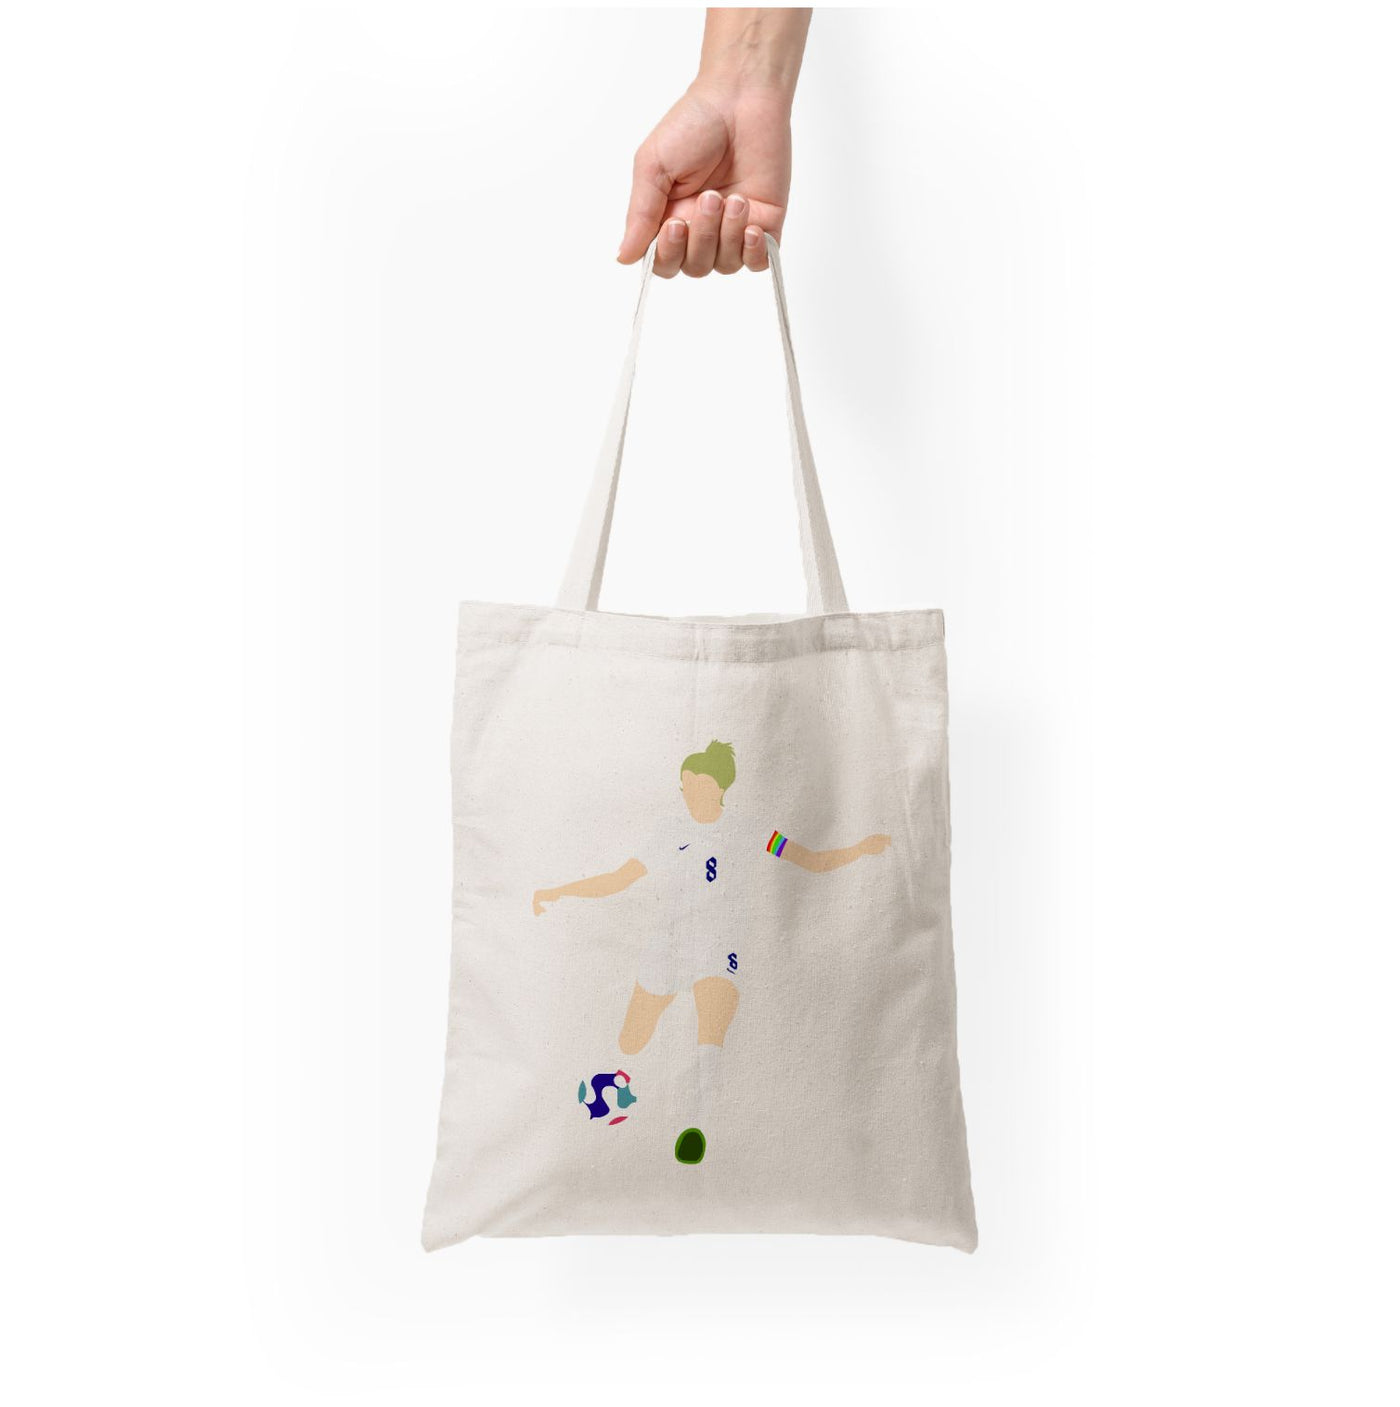 Leah Williamson - Womens World Cup Tote Bag